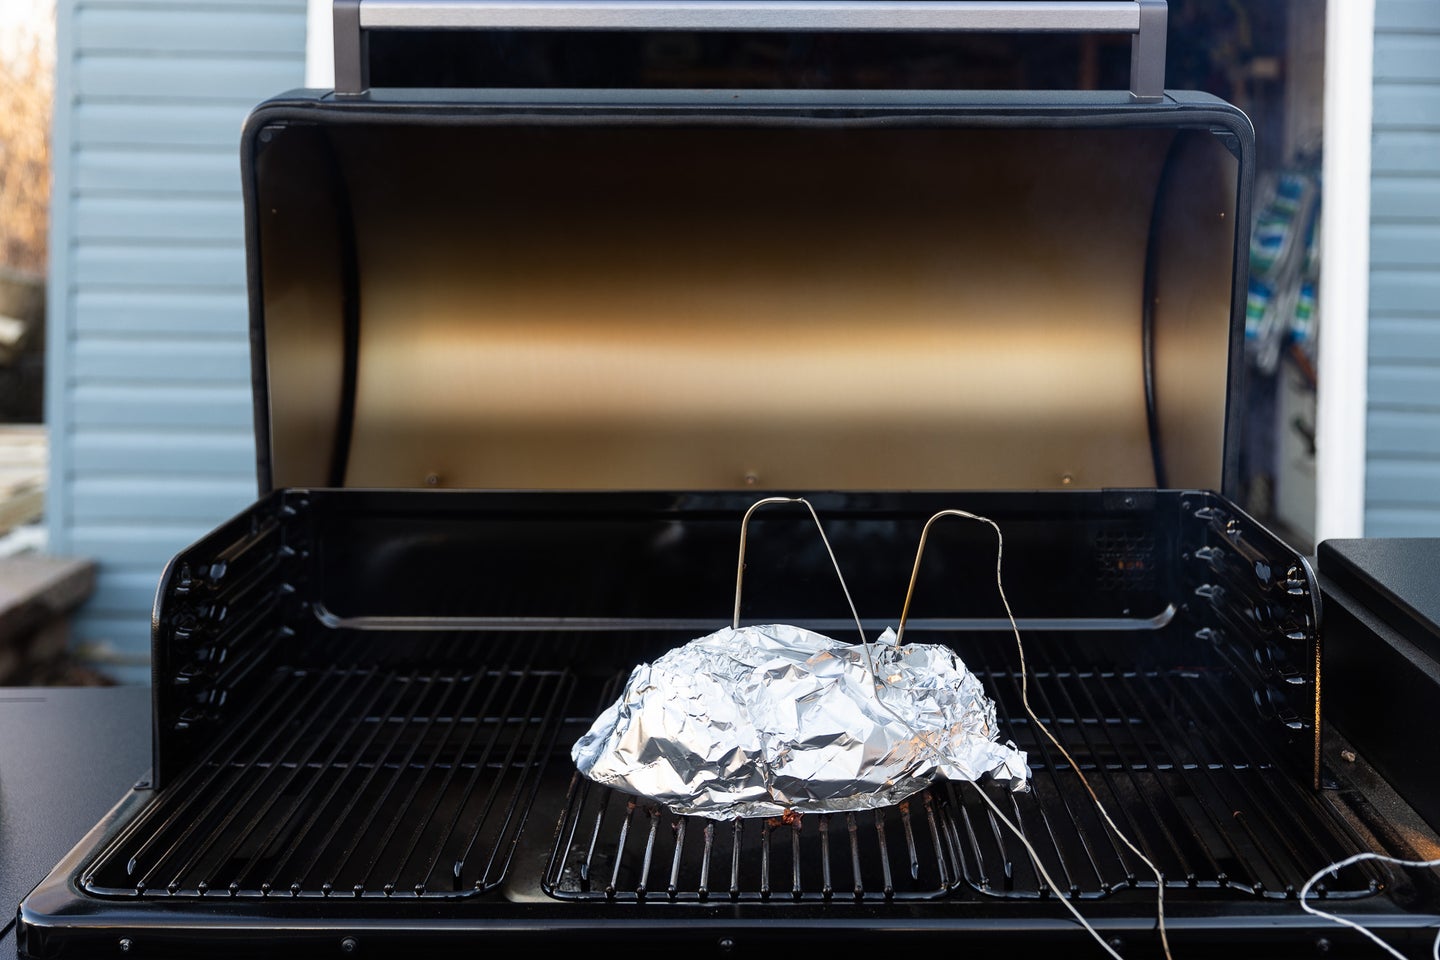 Traeger Ironwood XL grill review with a pulled pork smoking on it